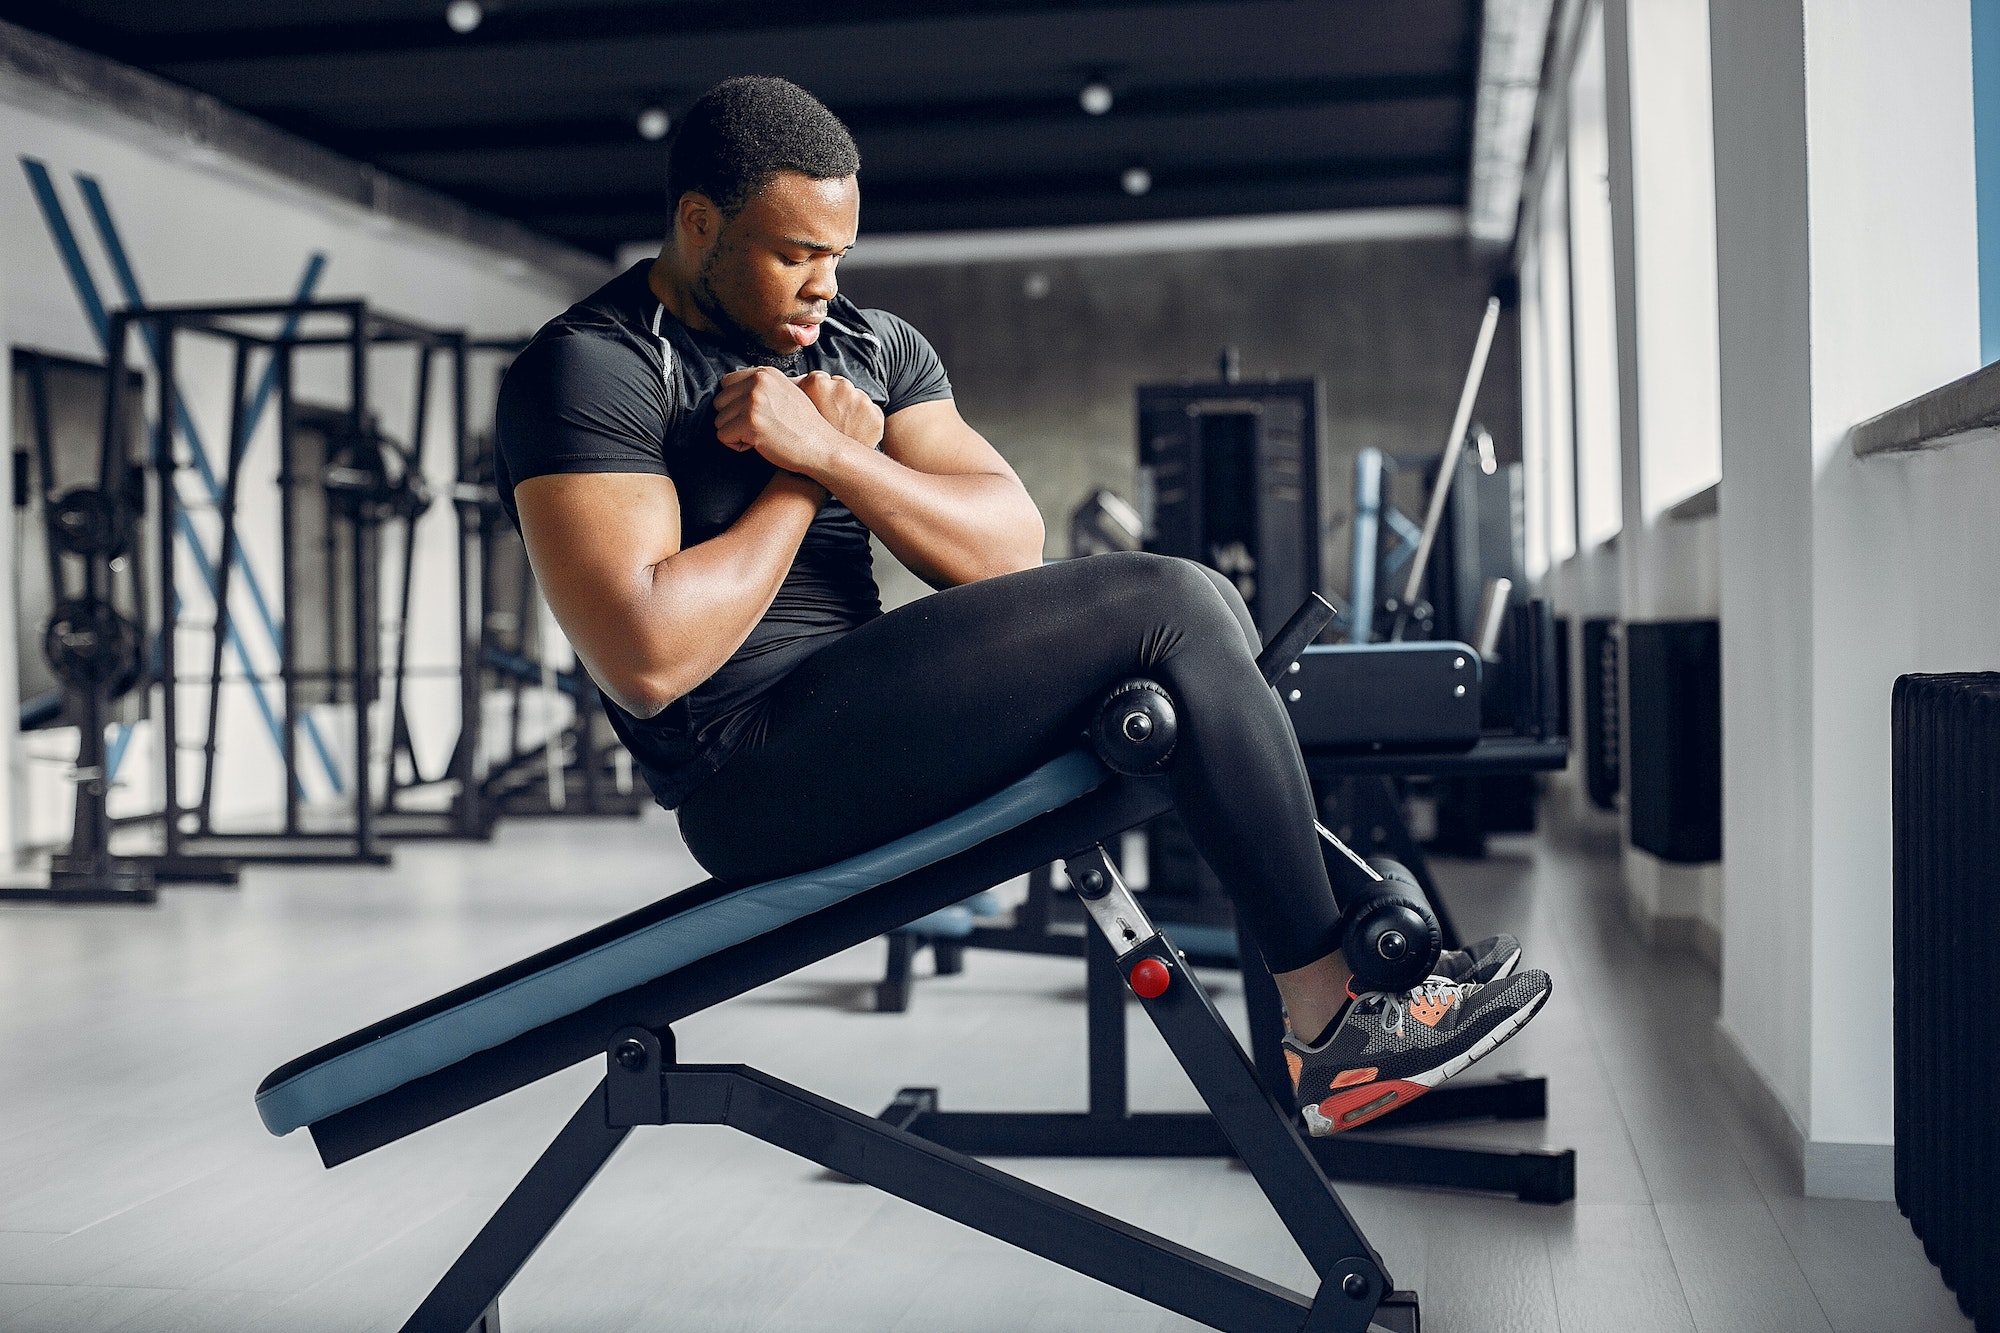 A handsome black man is engaged in a gym